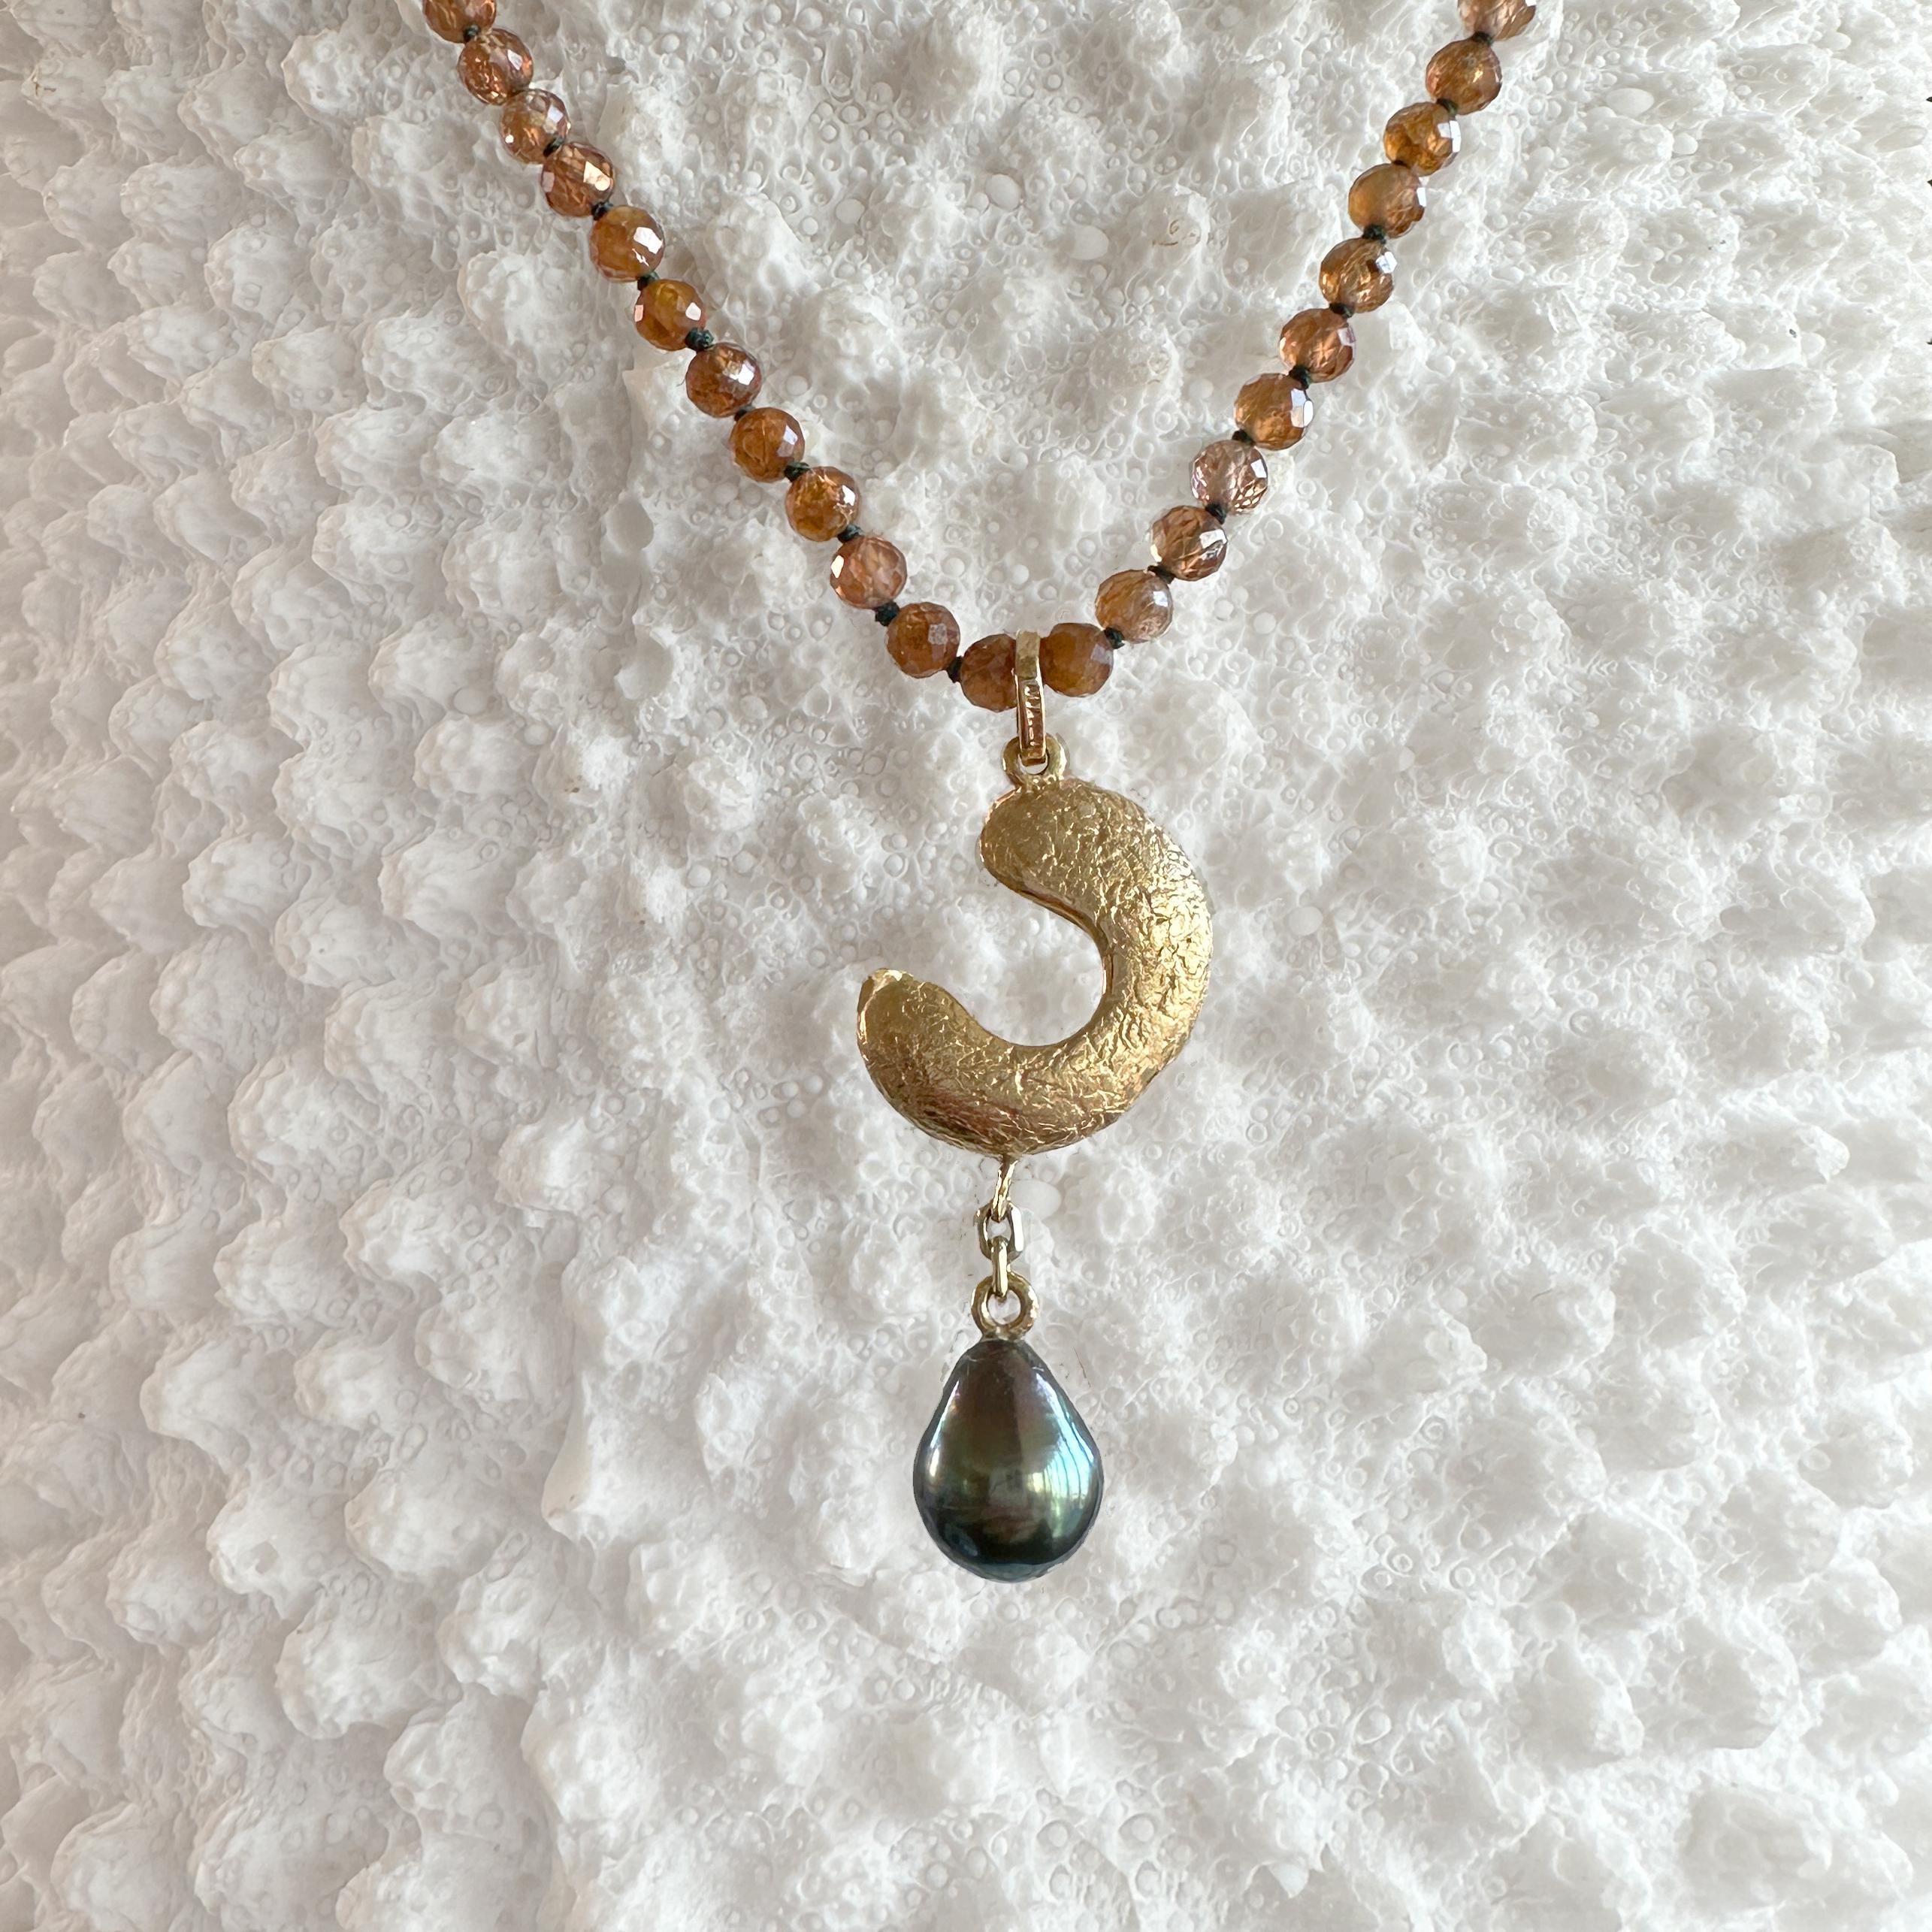 This gorgeous, one-of-a-kind 18 karat seed pod pendant by Eytan Brandes is cast from an actual seed pod.  For the drop, he chose a lustrous drop-shaped Tahitian pearl with stunning color -- black with strong green overtones.  

The bale is a